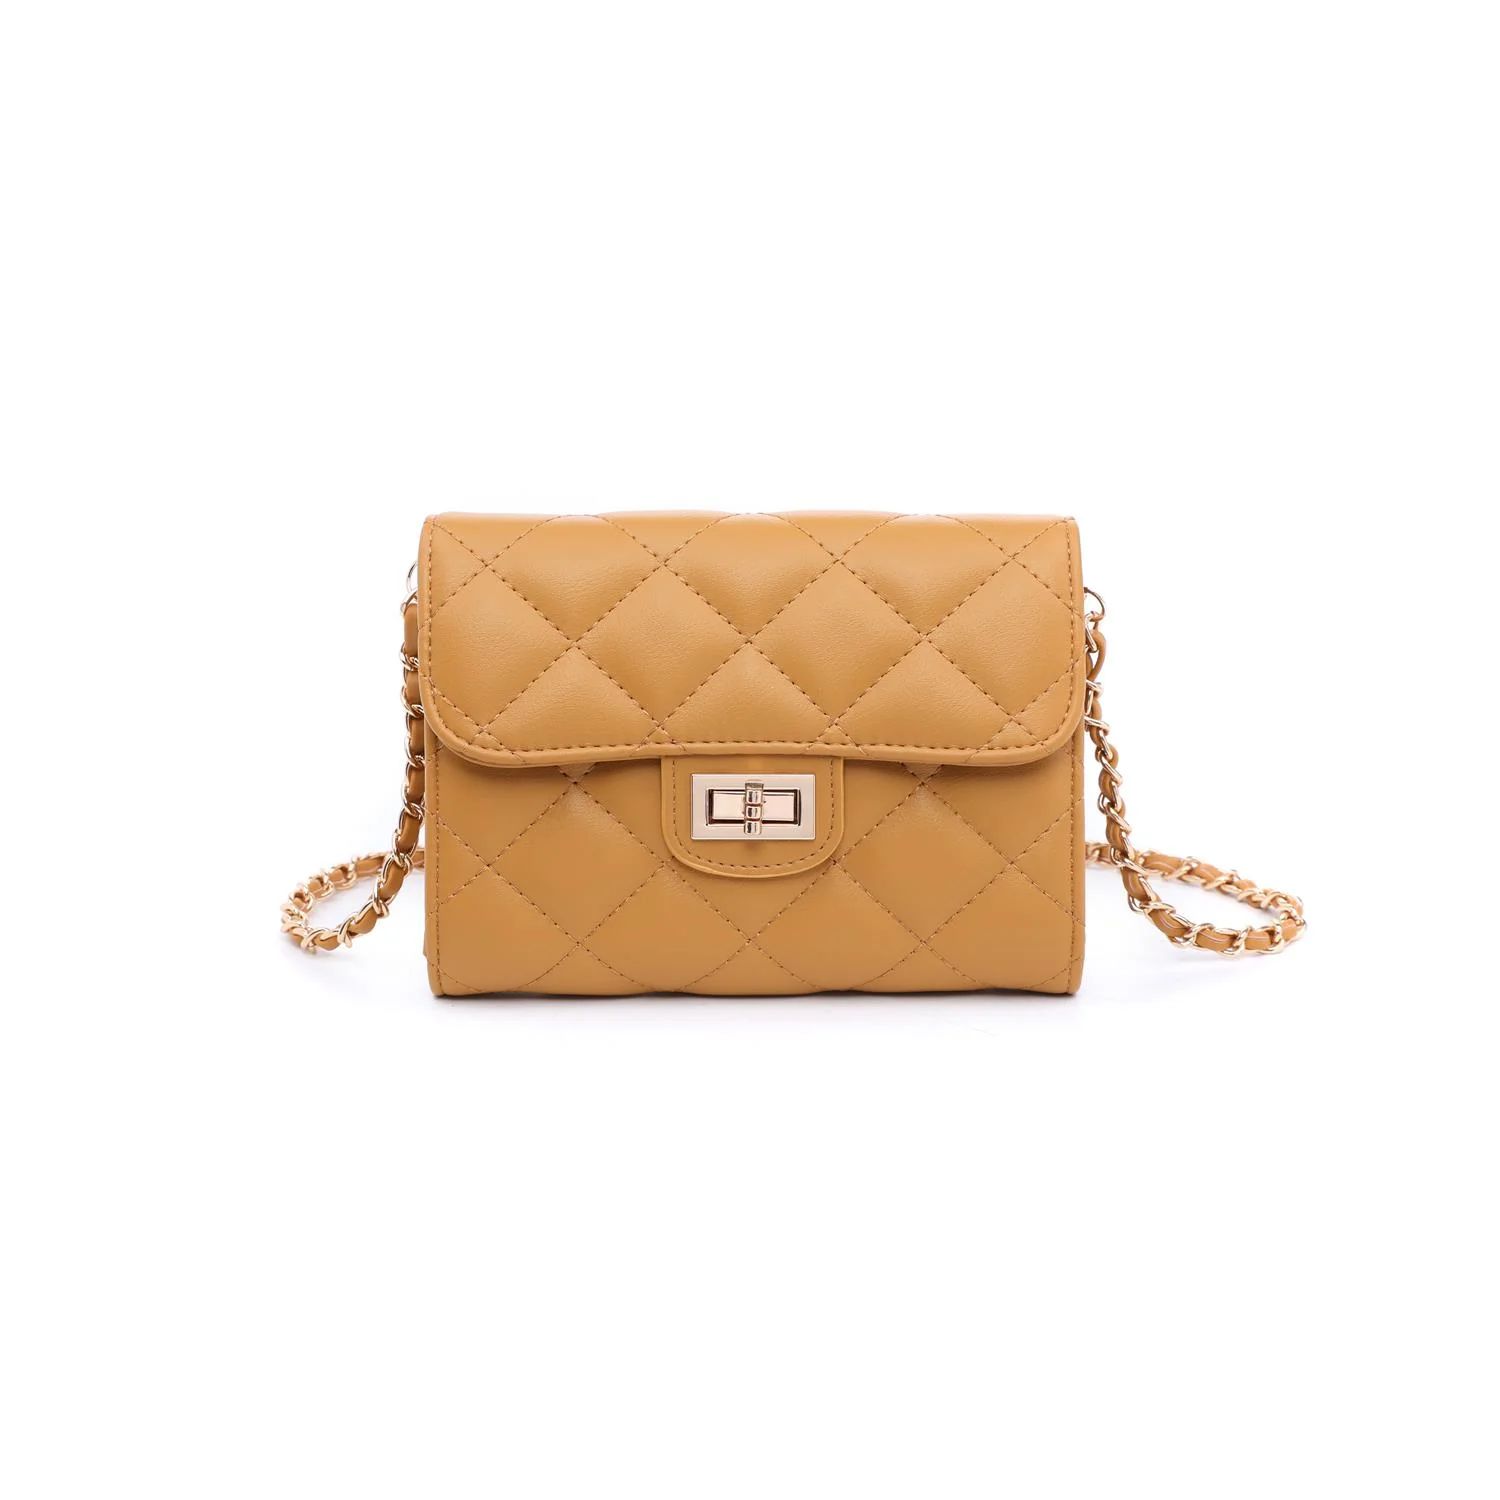 Urban Expressions Wendy Crossbody Bag in Mustard Lord & Taylor | Lord & Taylor